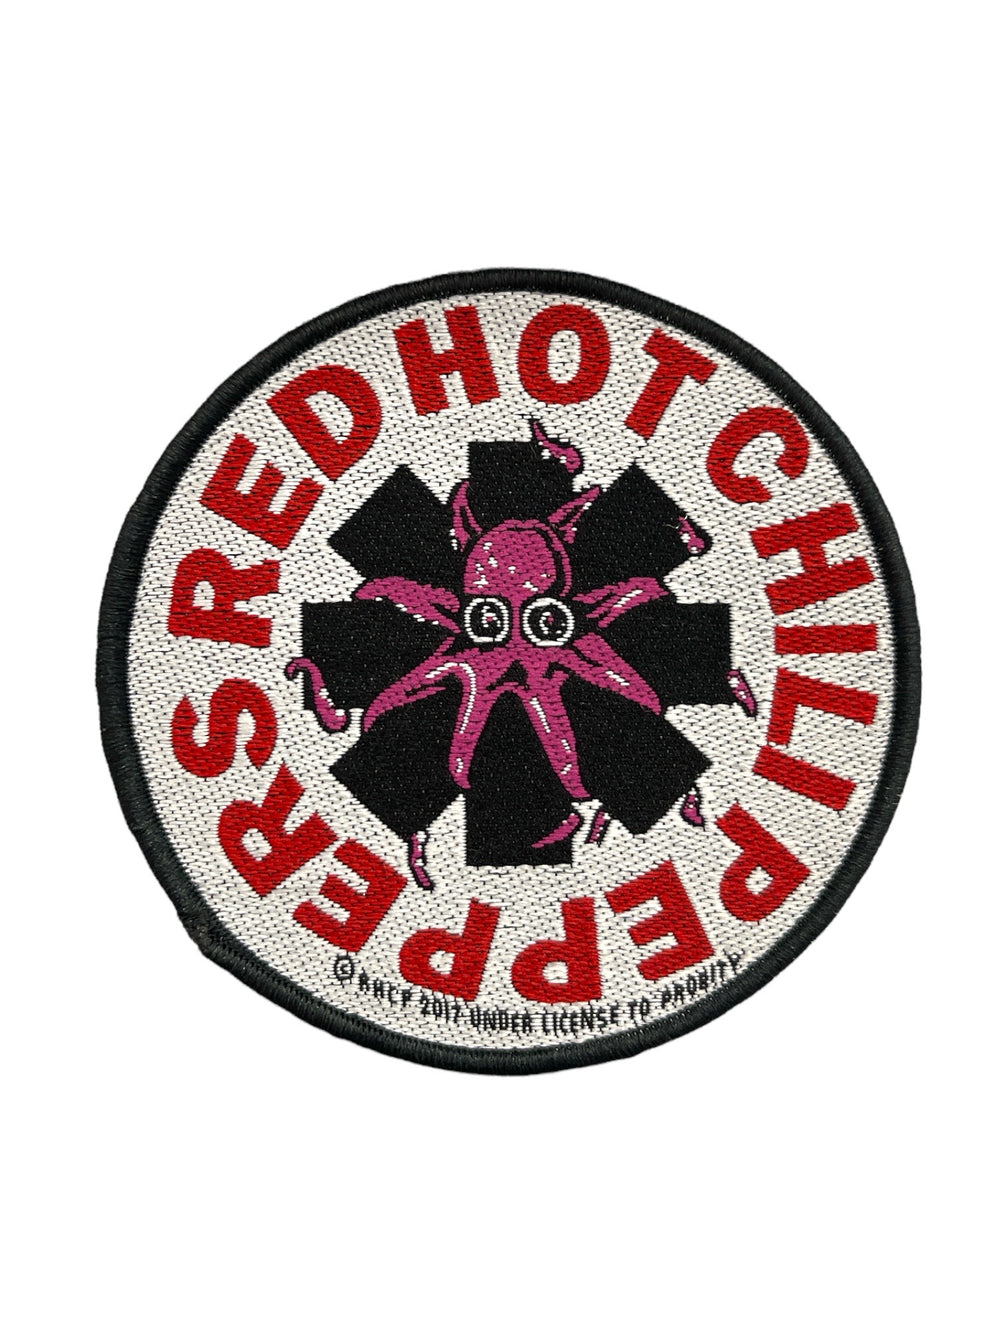 Red Hot Chilli Peppers Octopus Official Woven Patch Brand New